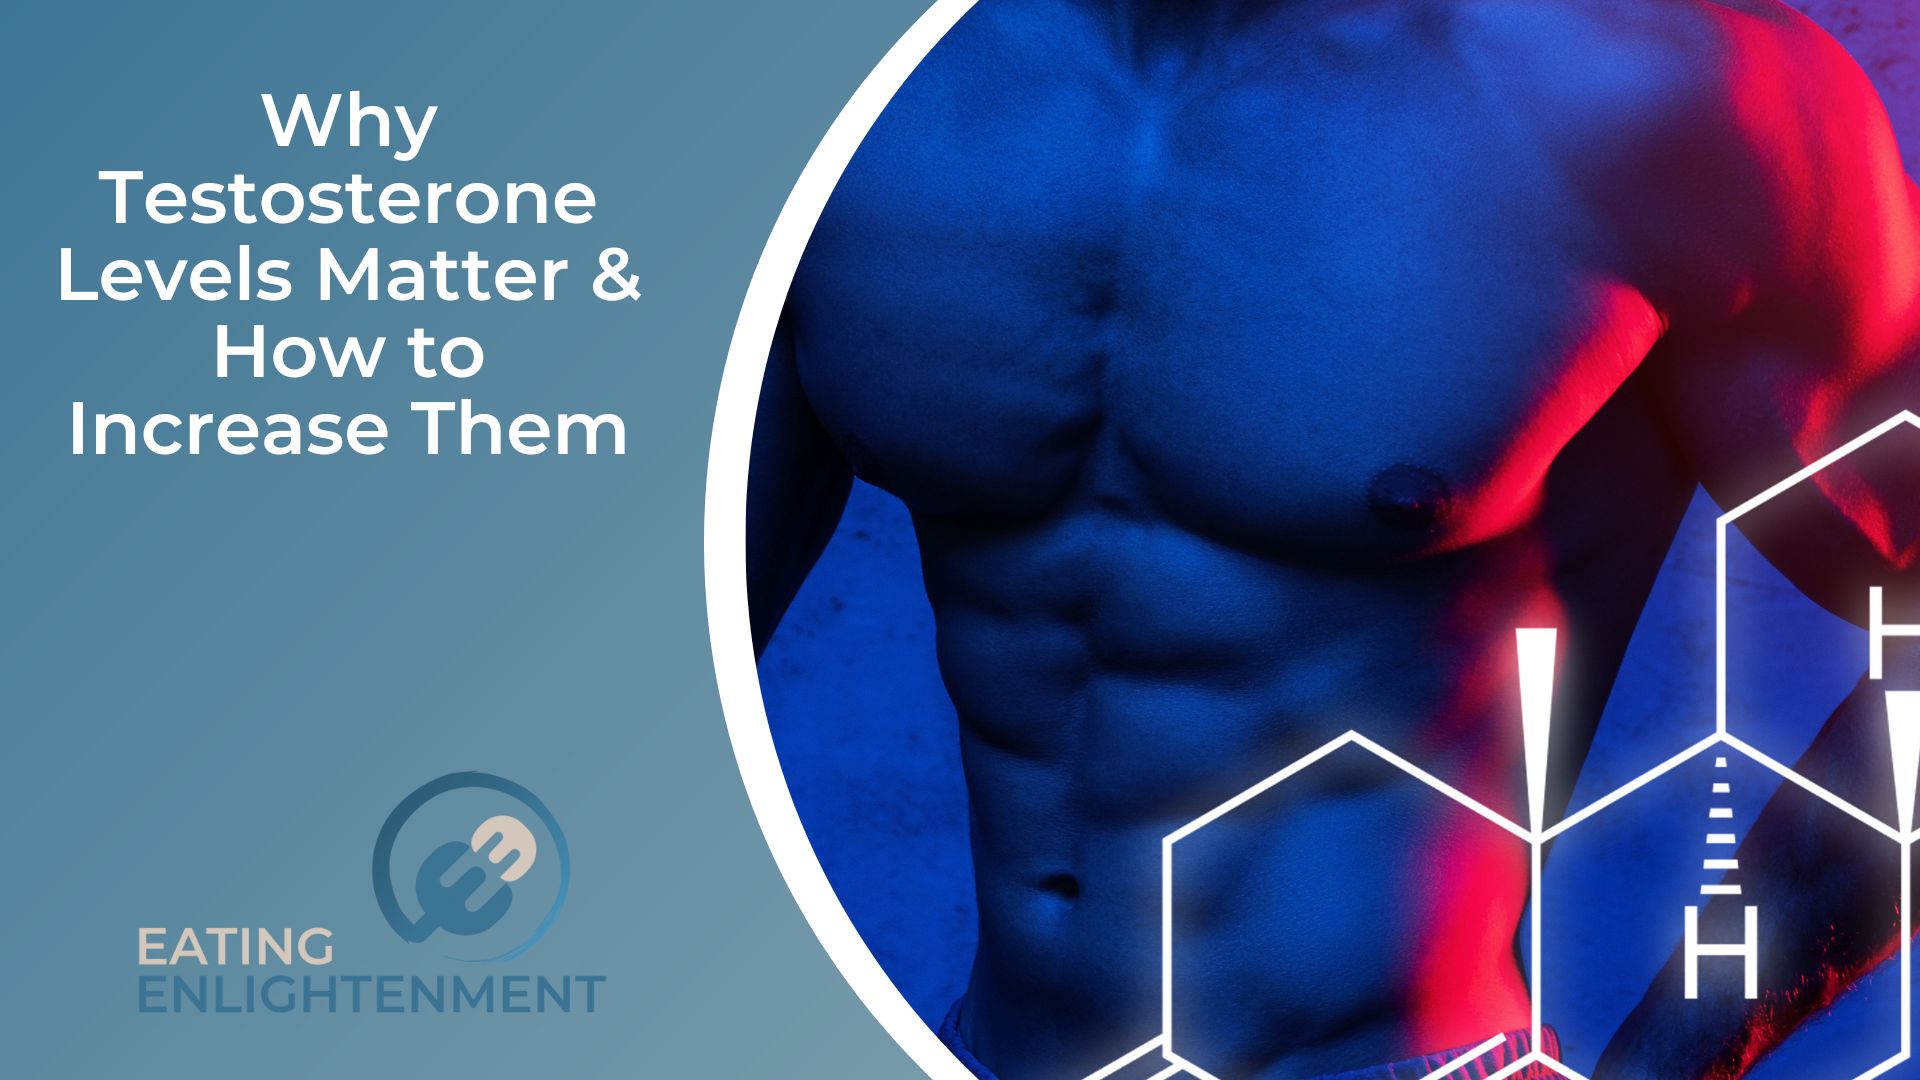 Why Testosterone Levels Matter & How to Increase Them